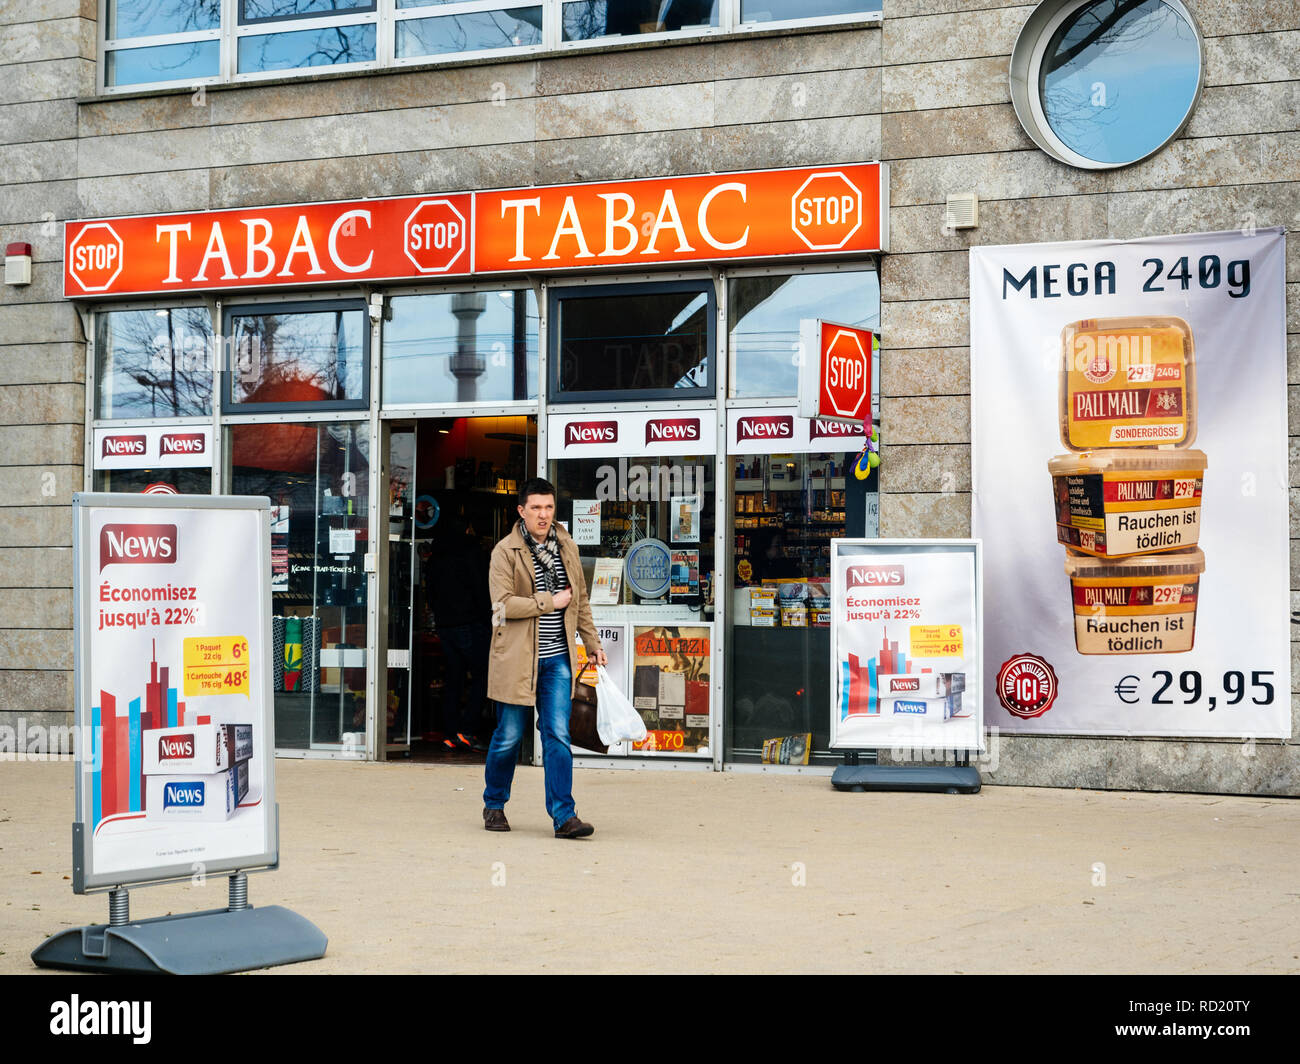 KEHL, GERMANY - MAR 29, 2018: man exit German taback shop offering cheaper than in France cigarettes and tobacco in city of Kehl, Germany 4 km from France Stock Photo